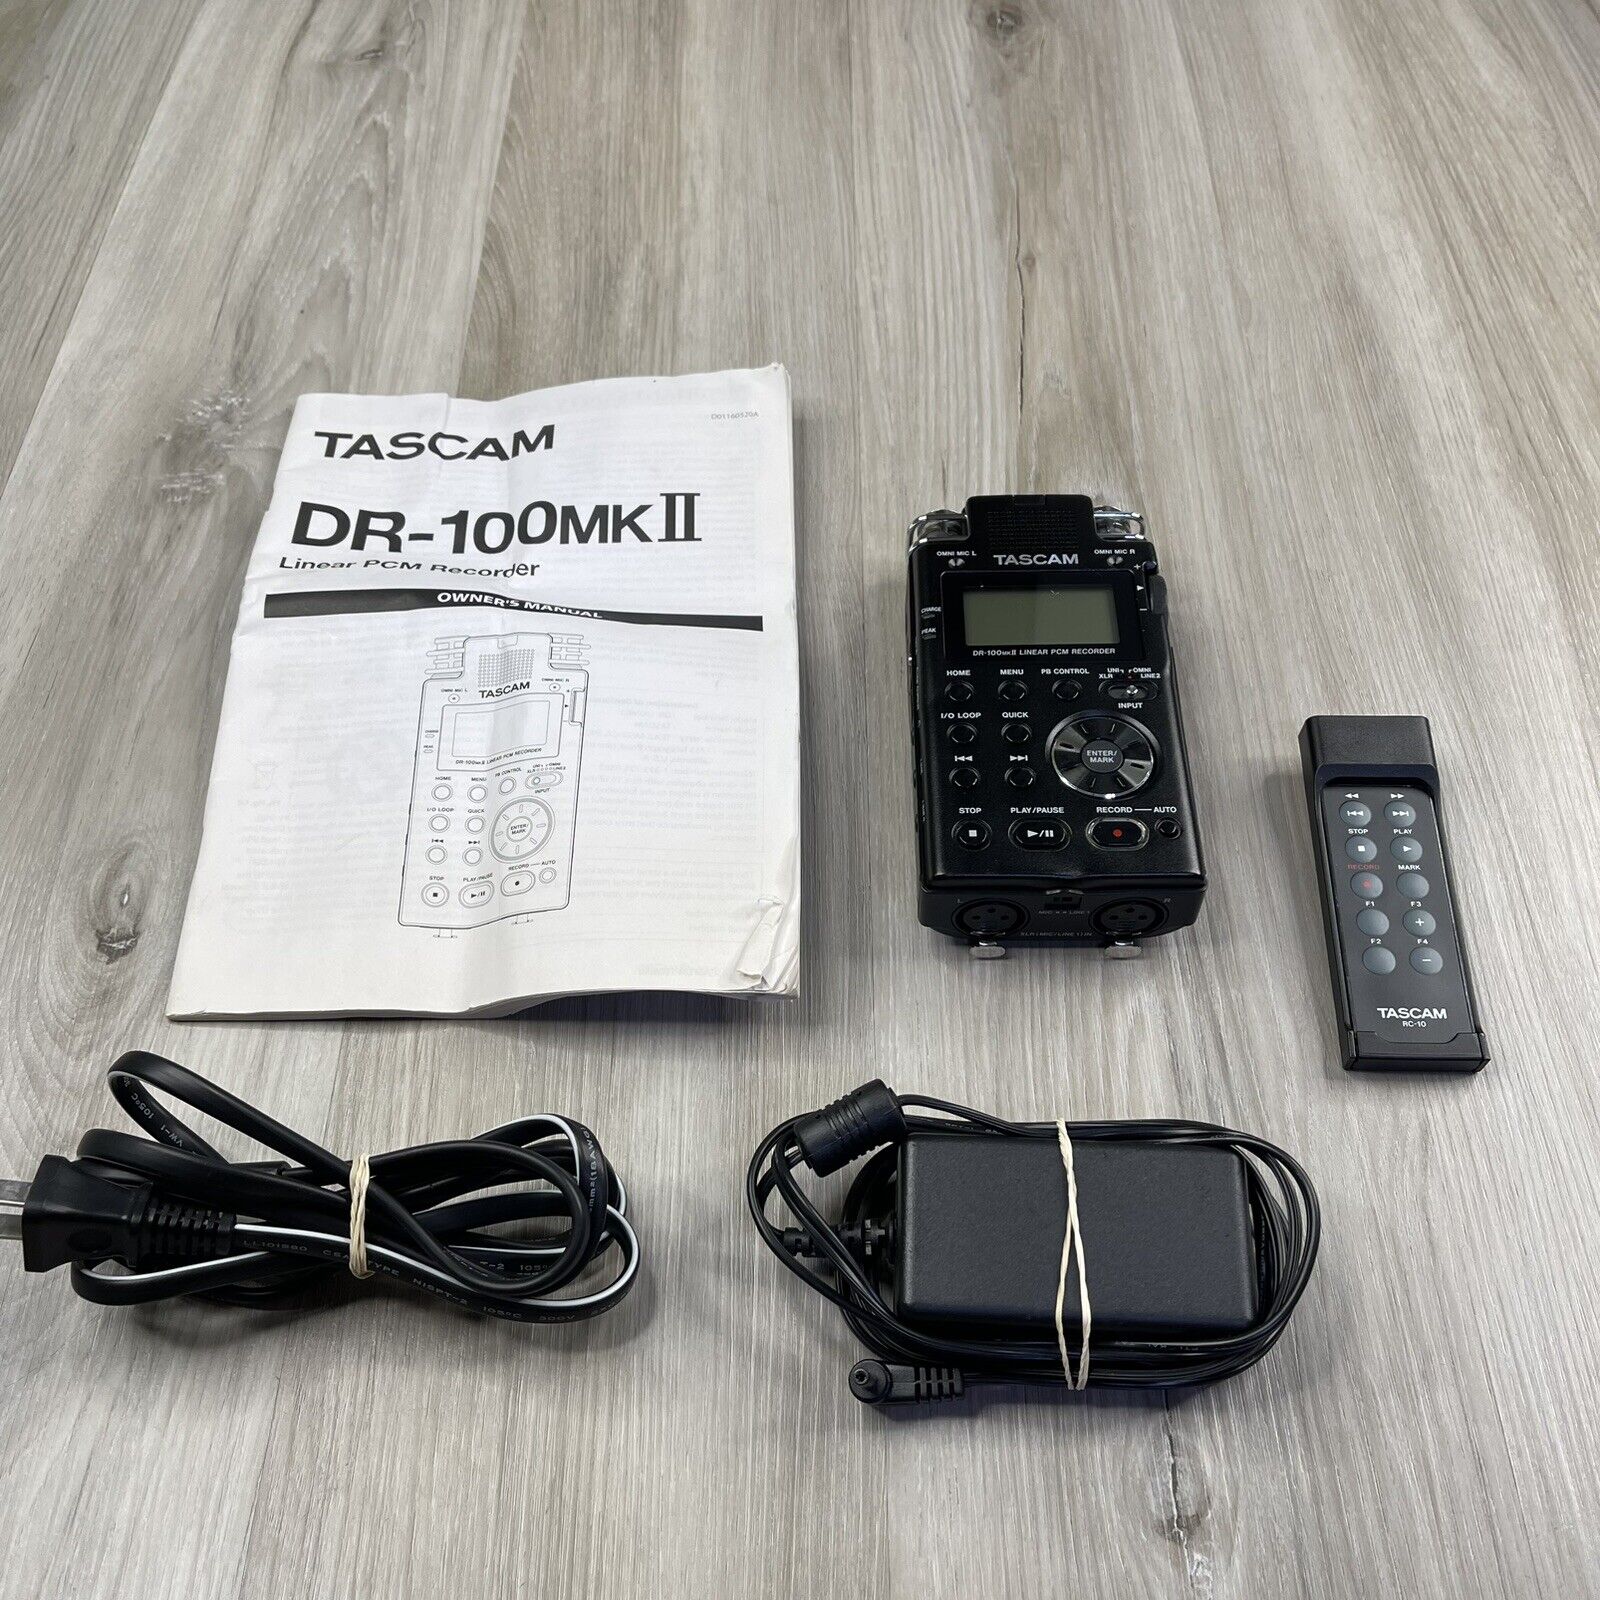 Tascam DR-100 MKII Linear PCM Recorder Portable Teac Corporation With Remote